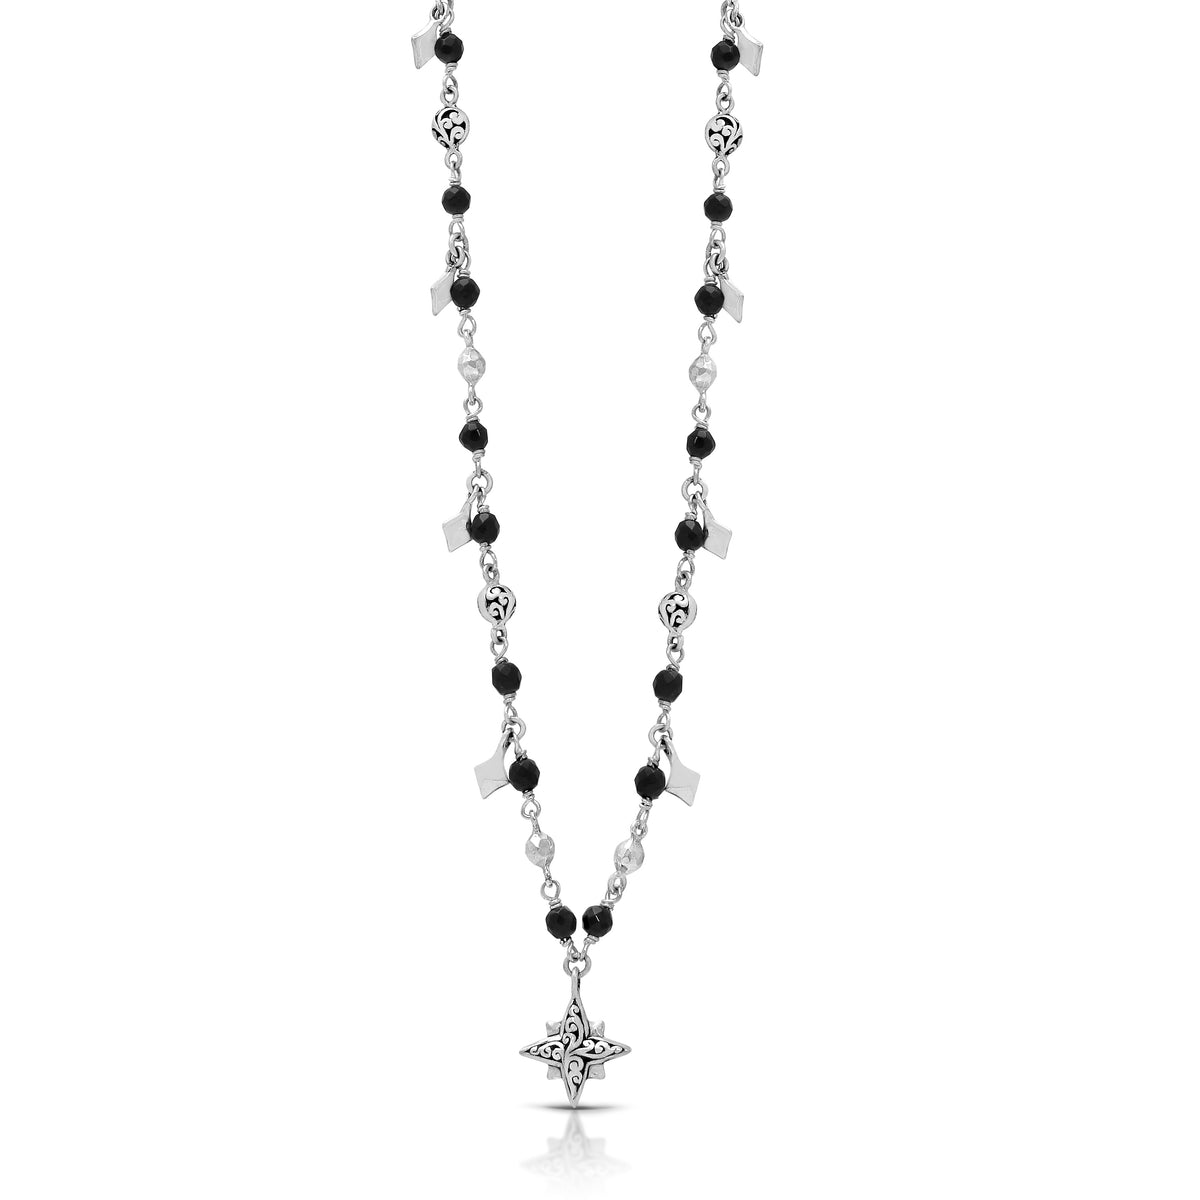 Black Onyx (3mm) Beads Single Strand Wire-Wrapped with Starbright Charm Necklace 17''-20'' Ext